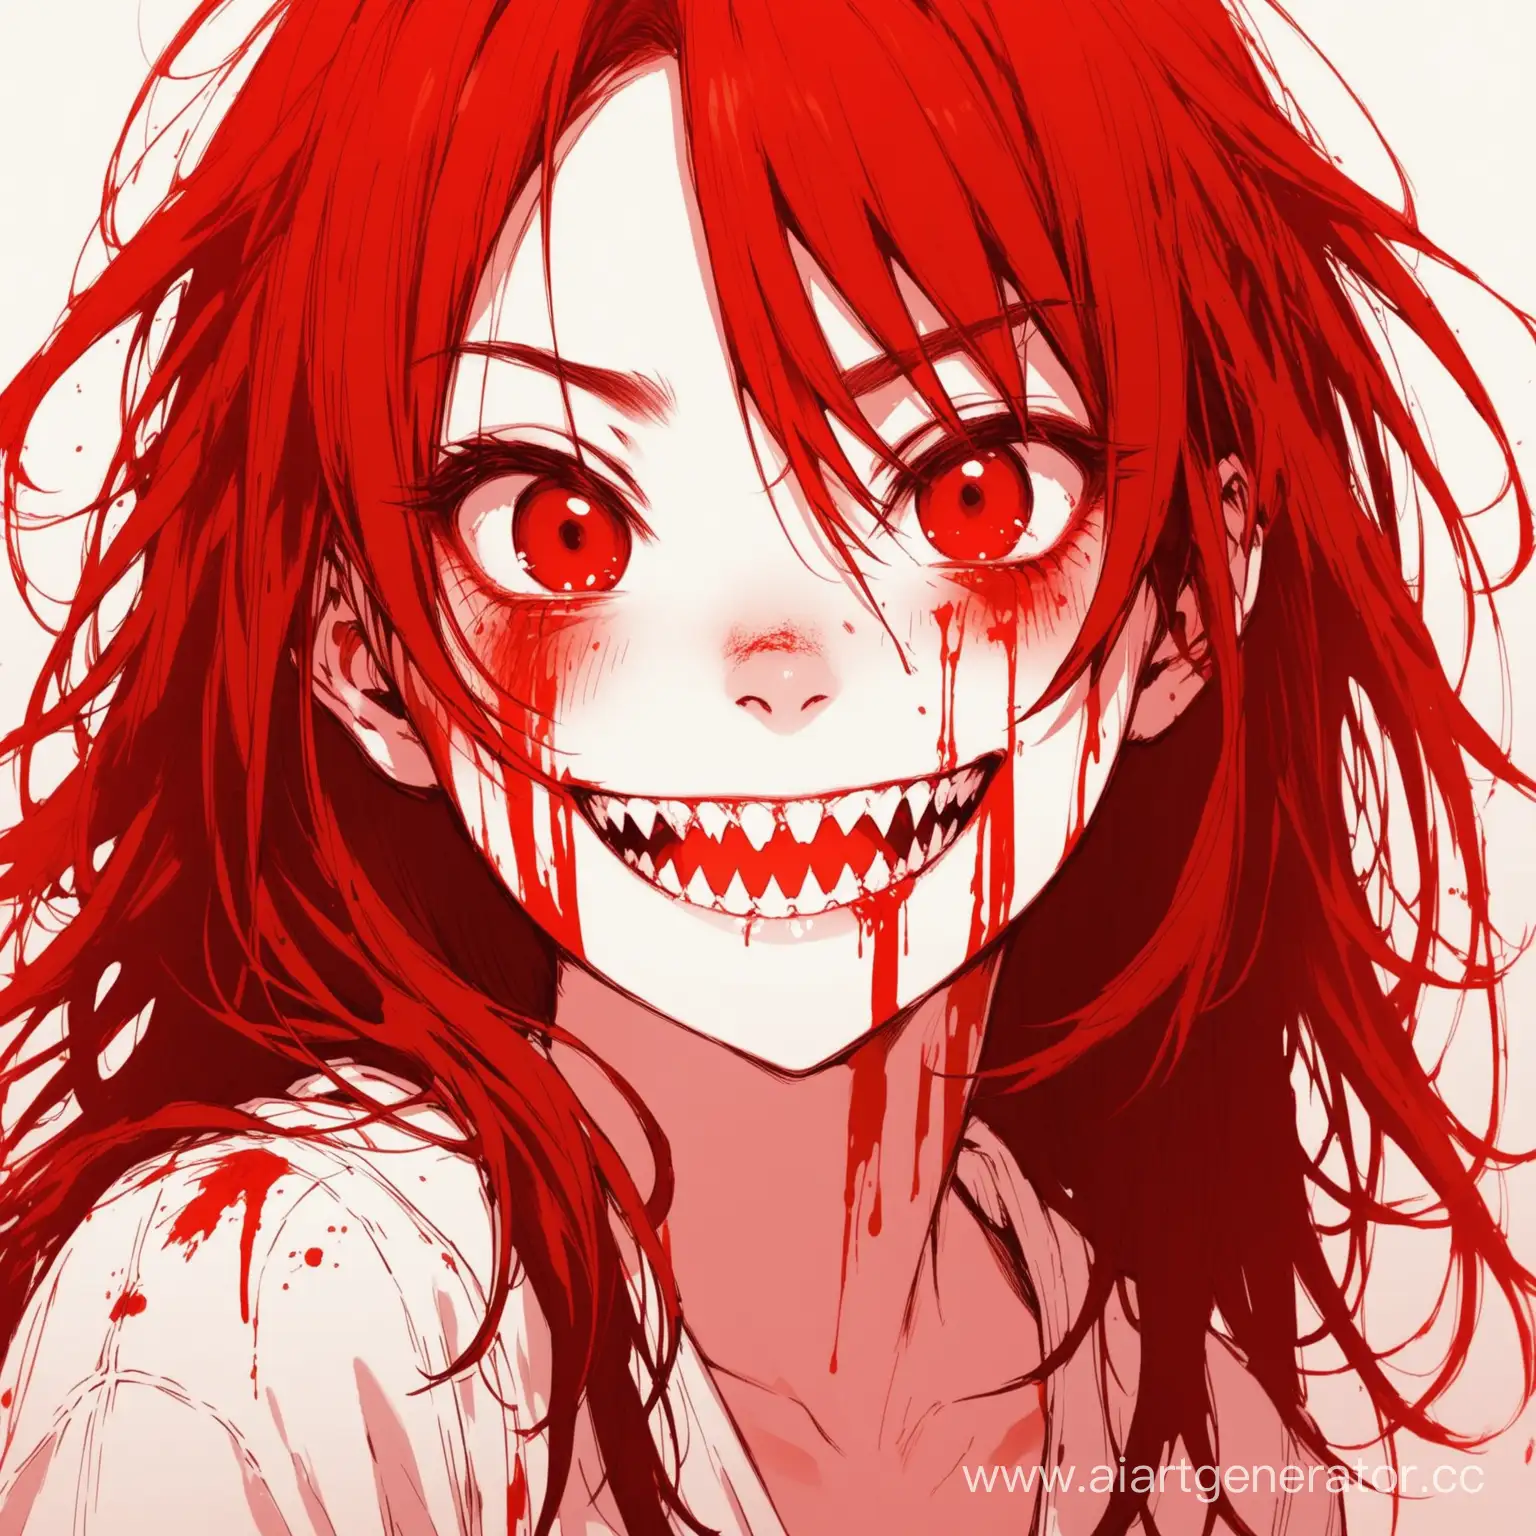 Ecstatic-Girl-with-a-Sinister-Grin-and-BloodRed-Filtered-Ambiance